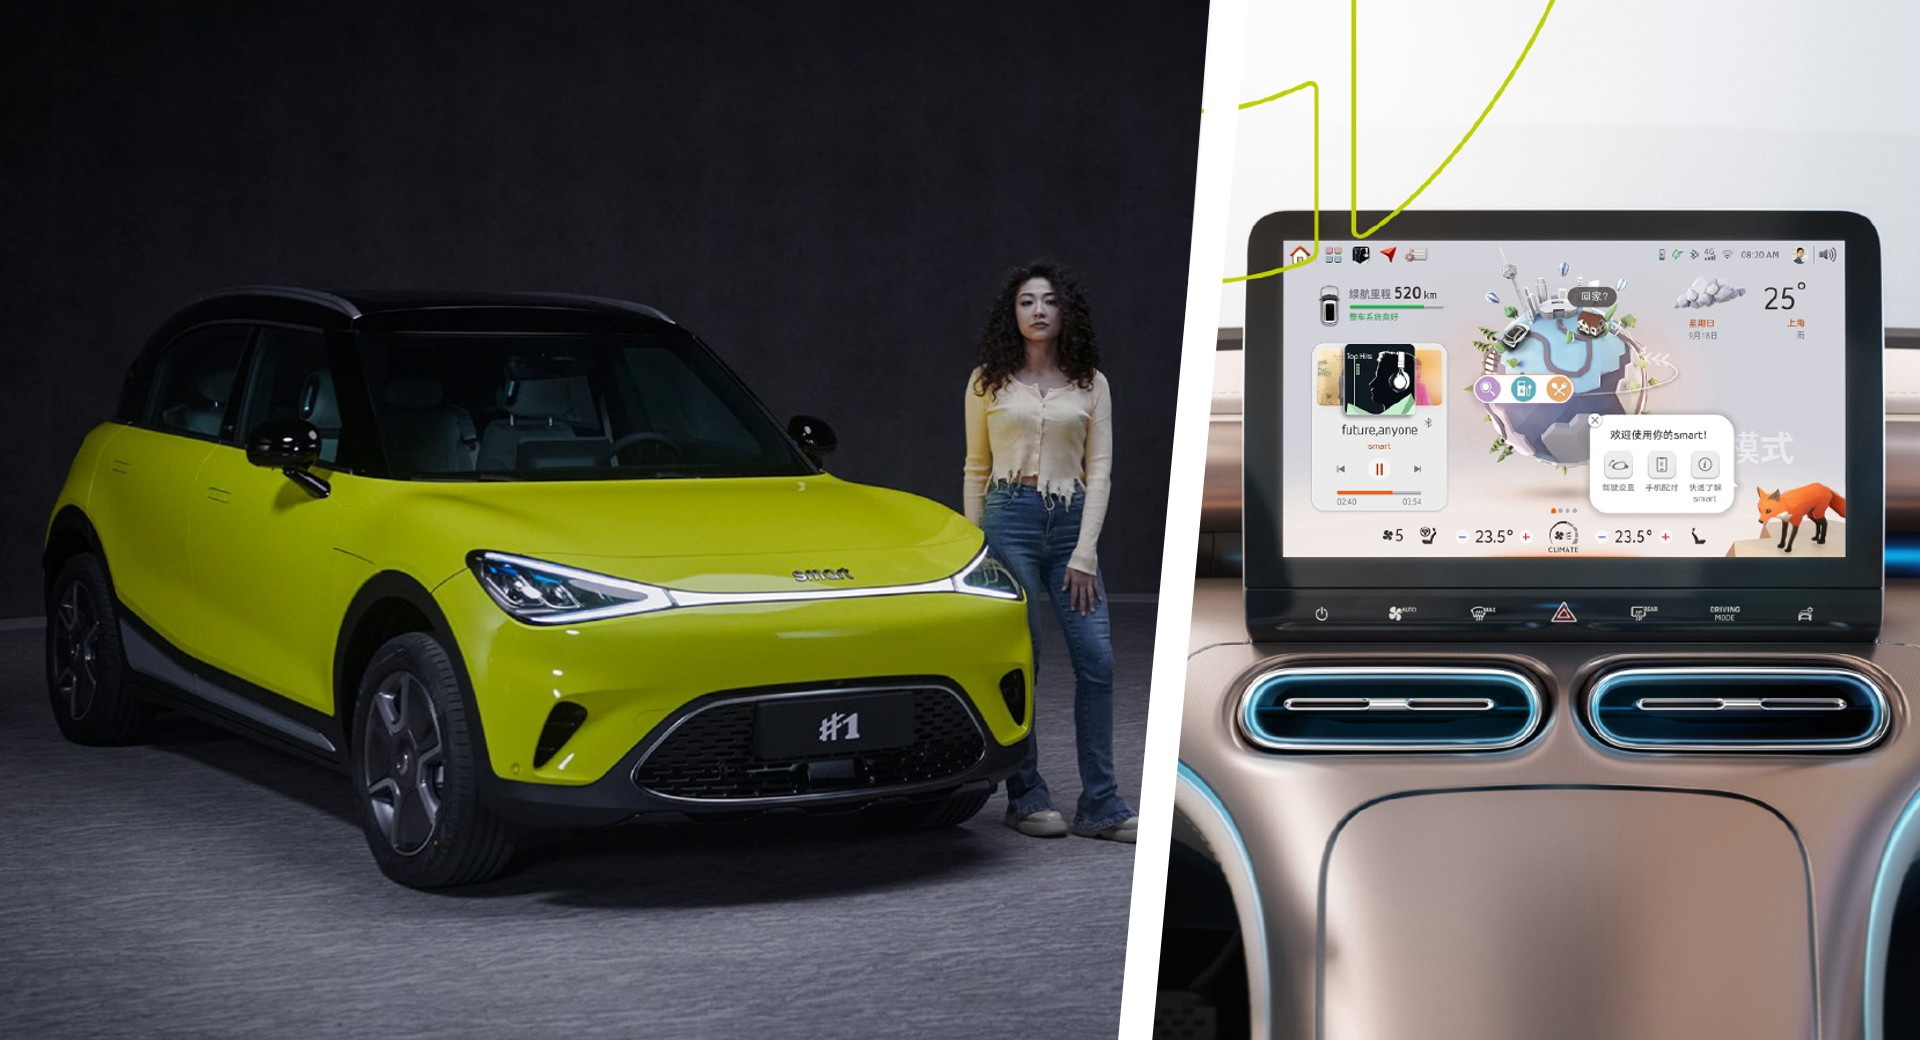 Smart #1 Available For Reservation In China, Prices Start From $29,000